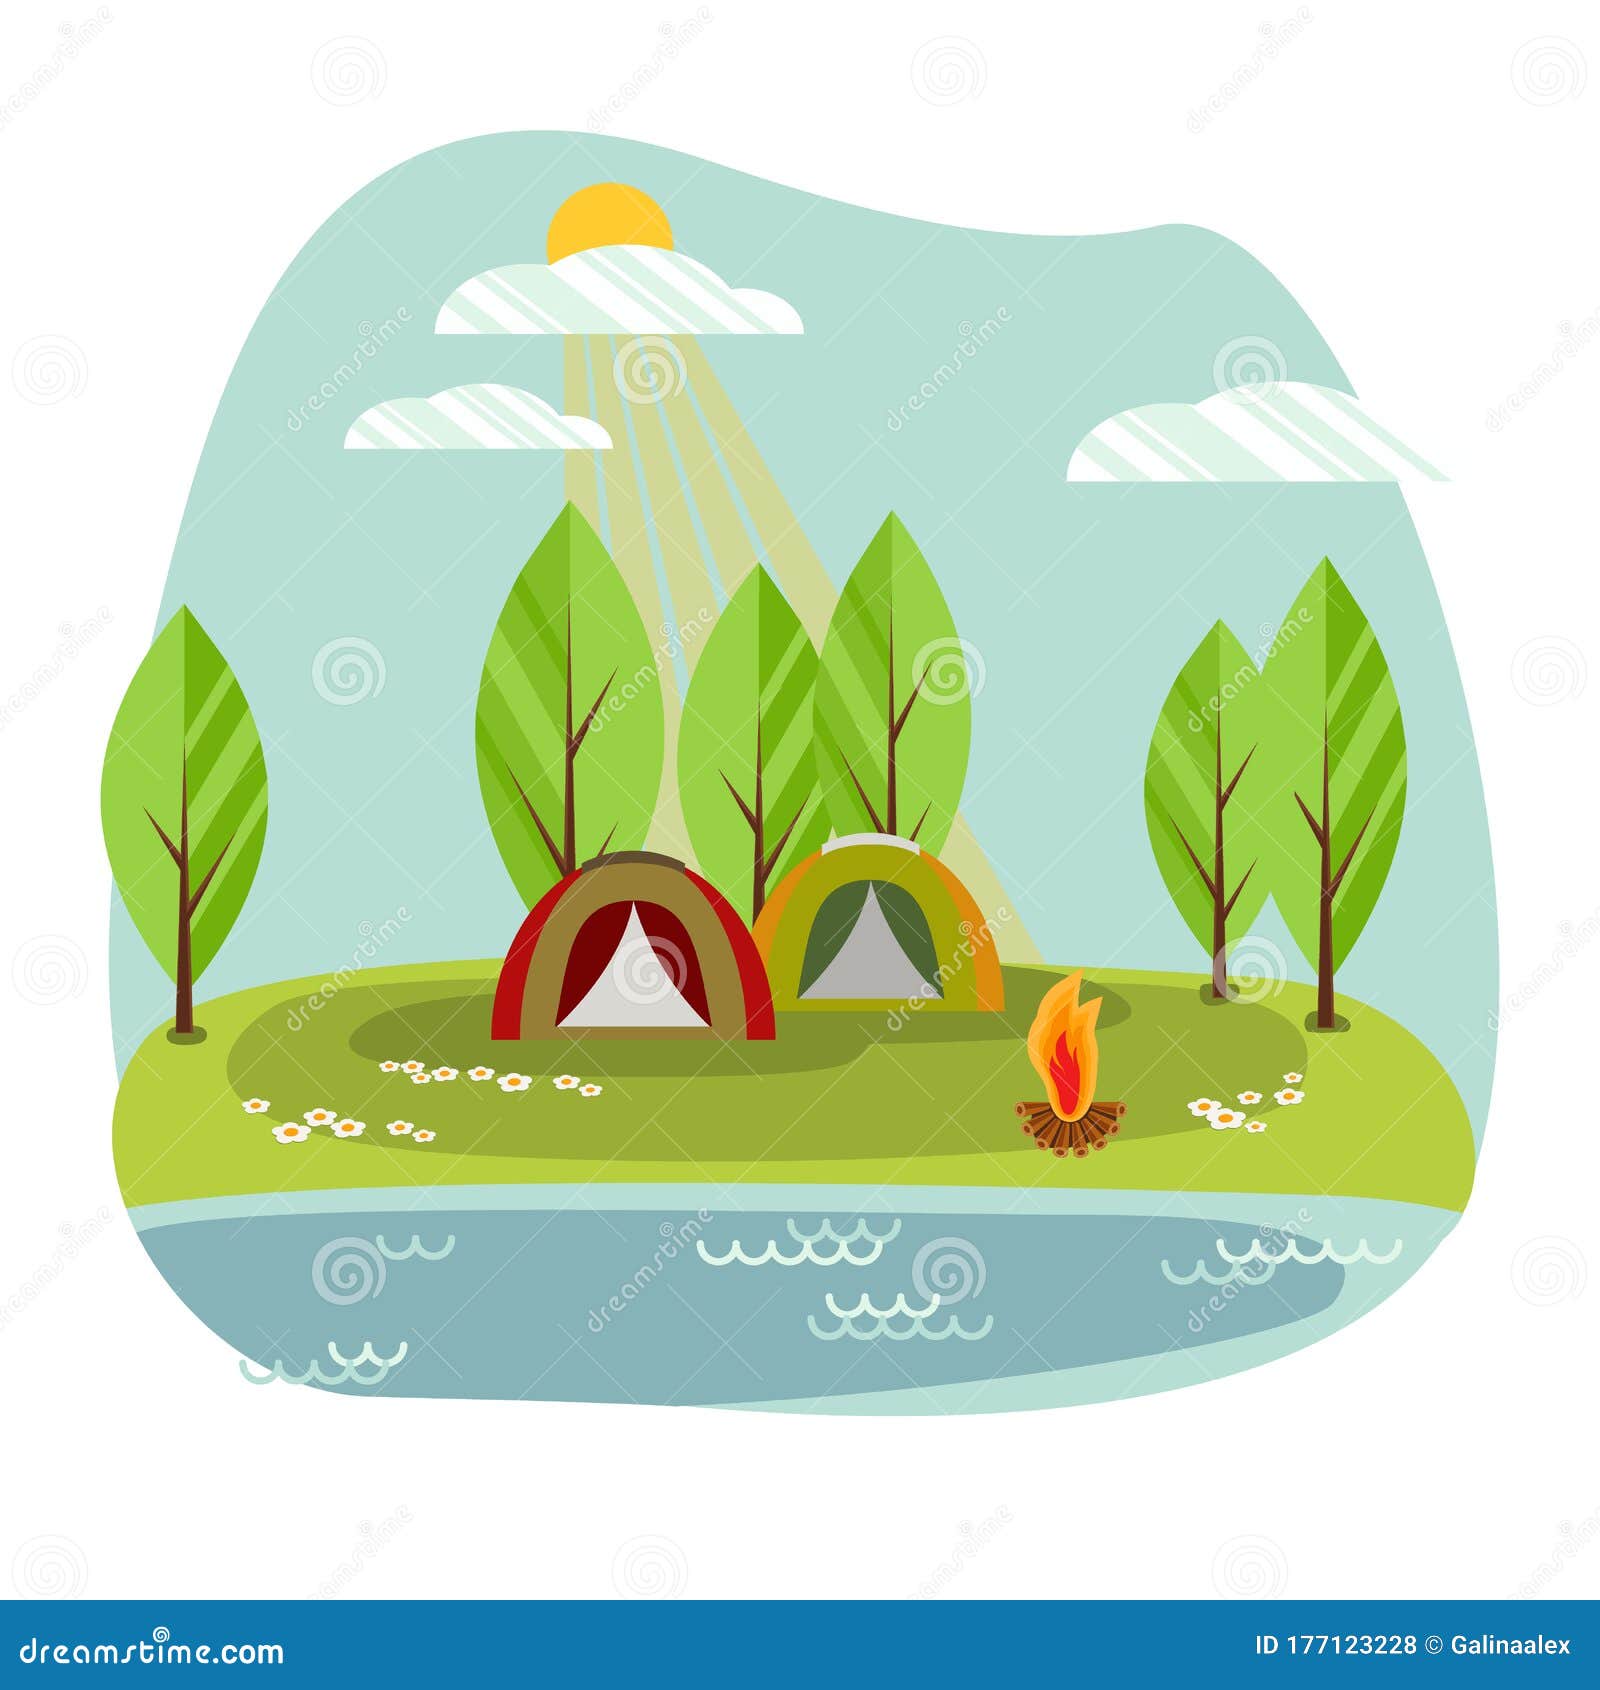 Background for Summer Camp, Nature Tourism, Camping, Hiking or Glamping  Stock Vector - Illustration of summertime, tents: 177123228